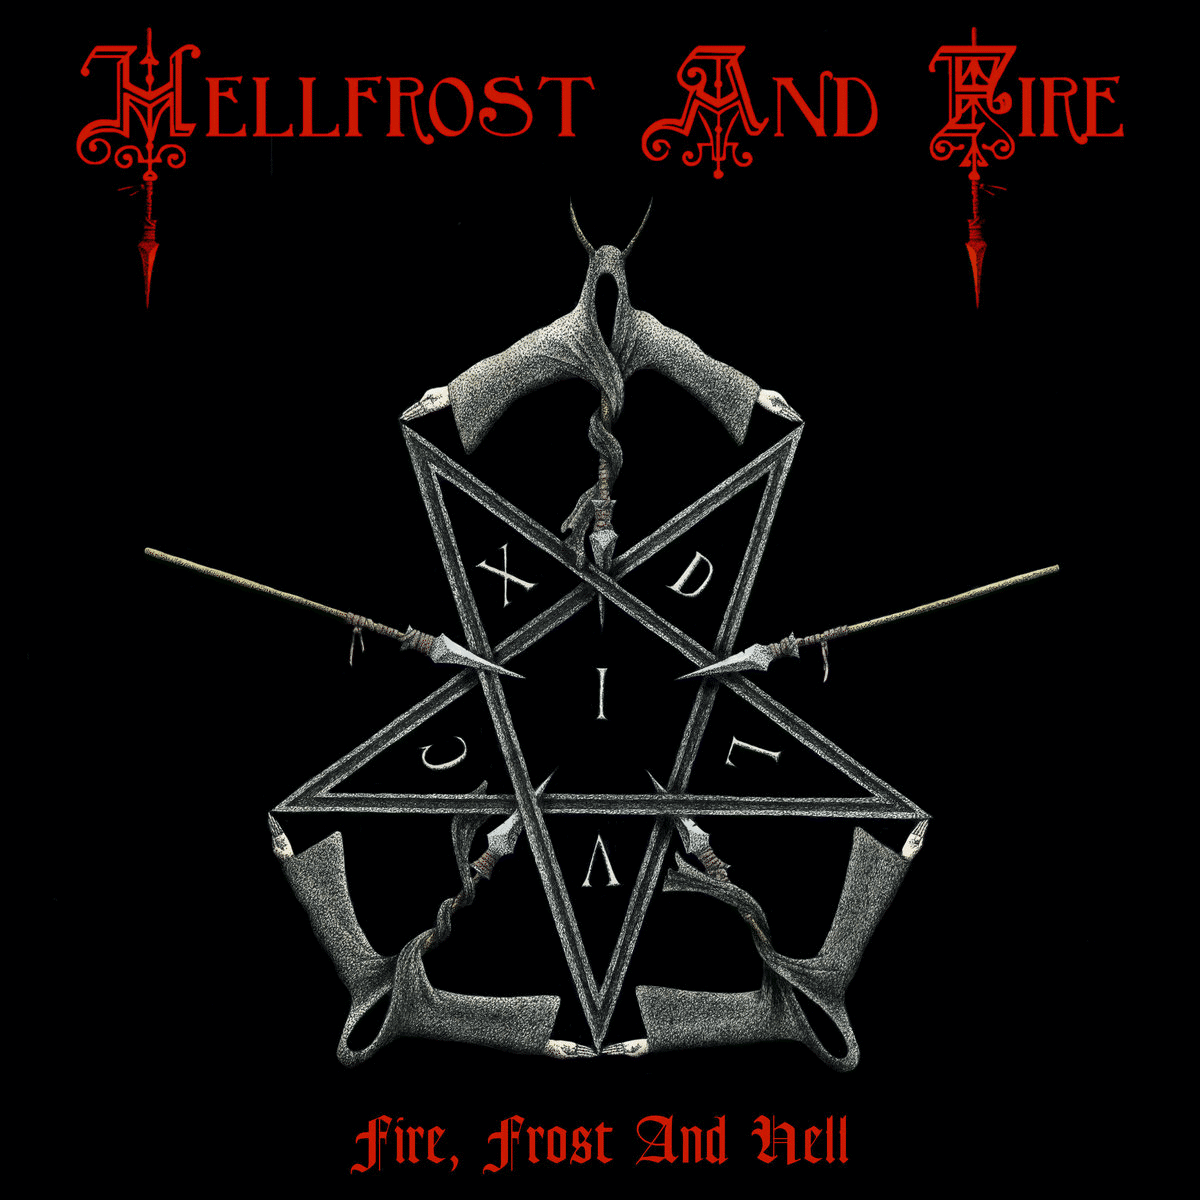 hellfrost-and-fire-fire-frost-hell-album-cover.png